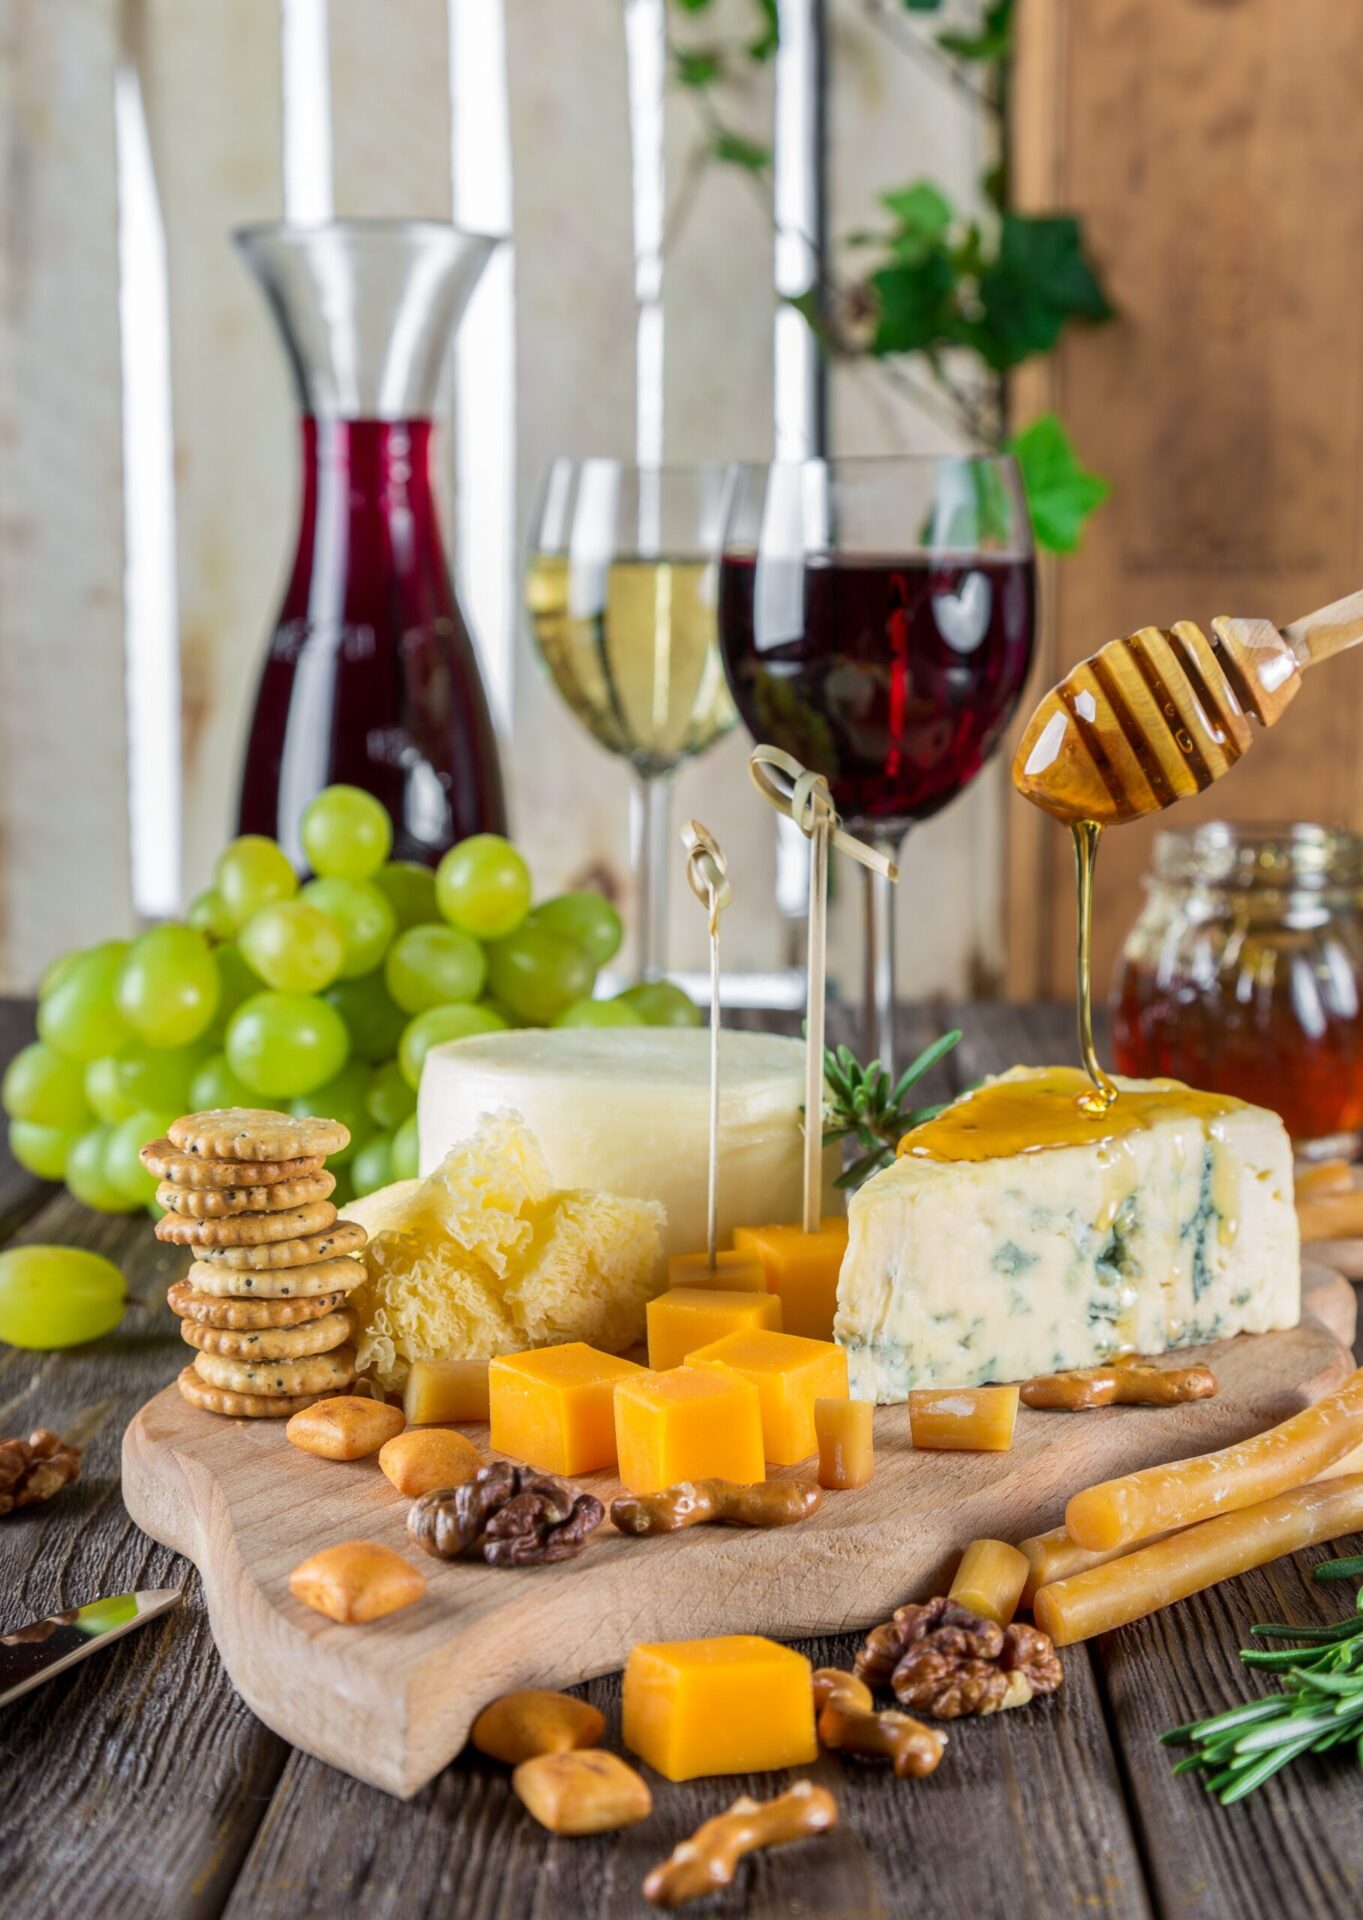 9 great ideas for a vegetarian cheese board